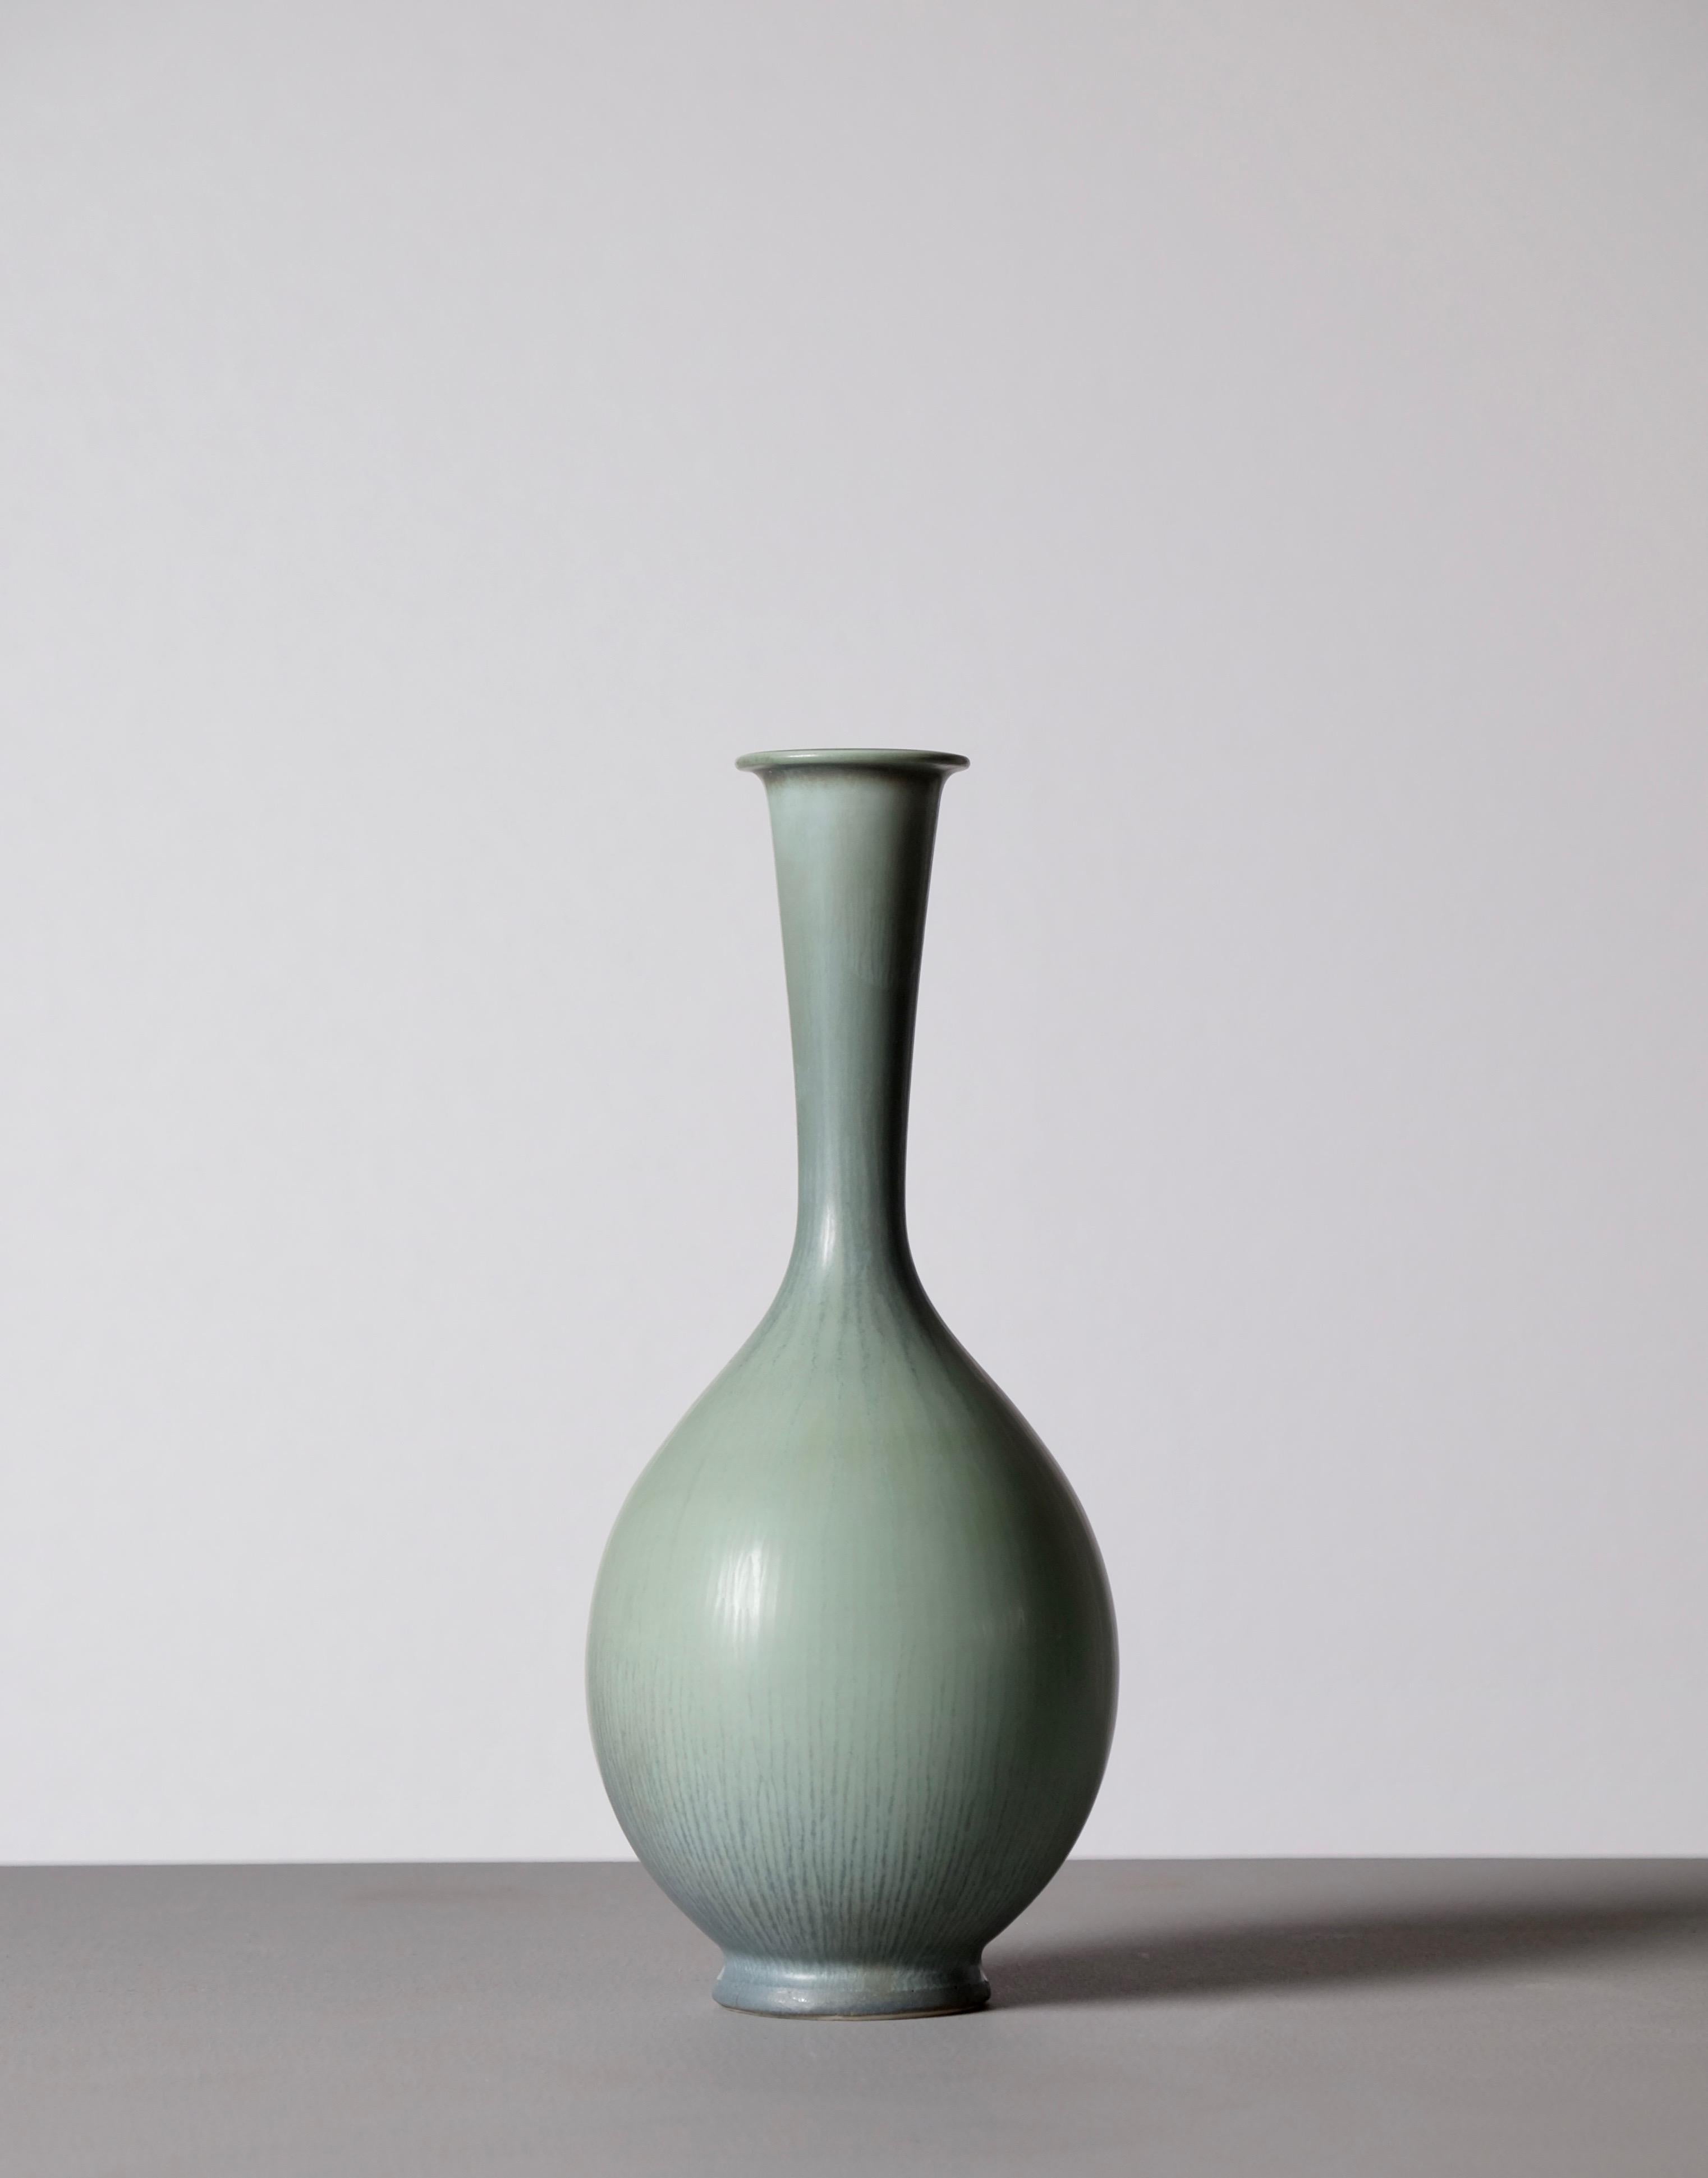 Unique, handmade. Stamped. Produced by Gustavsberg, Sweden.
Fantastic glaze in blue/green tones.
Measures: Height 22 cm.